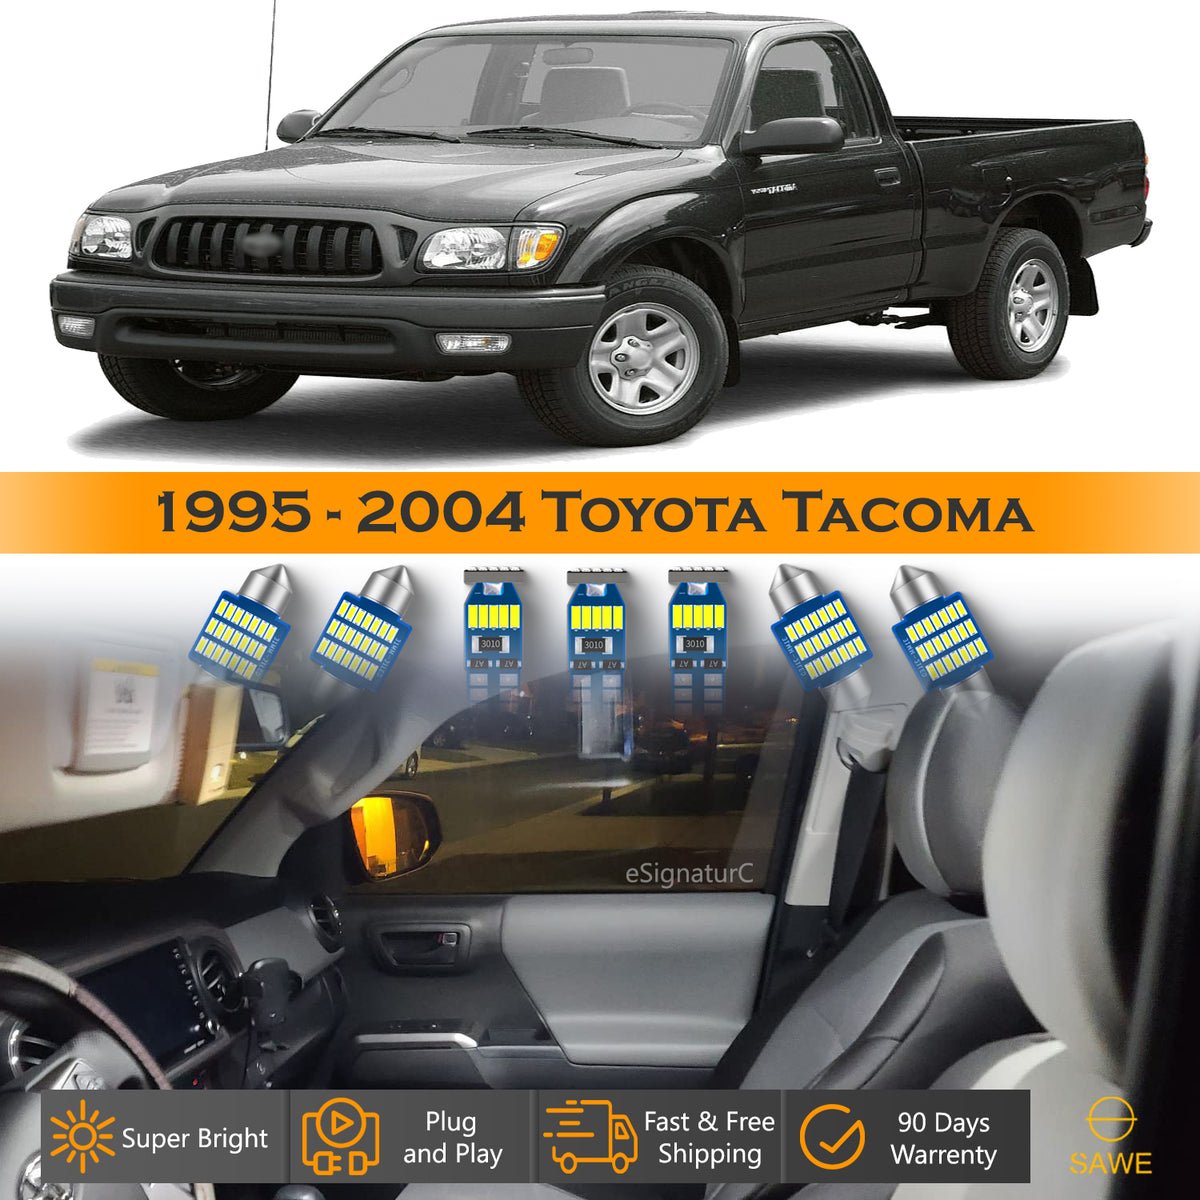 For Toyota Tacoma Interior LED Lights - Dome & Map Lights Package Kit for 1995 - 2004 - White